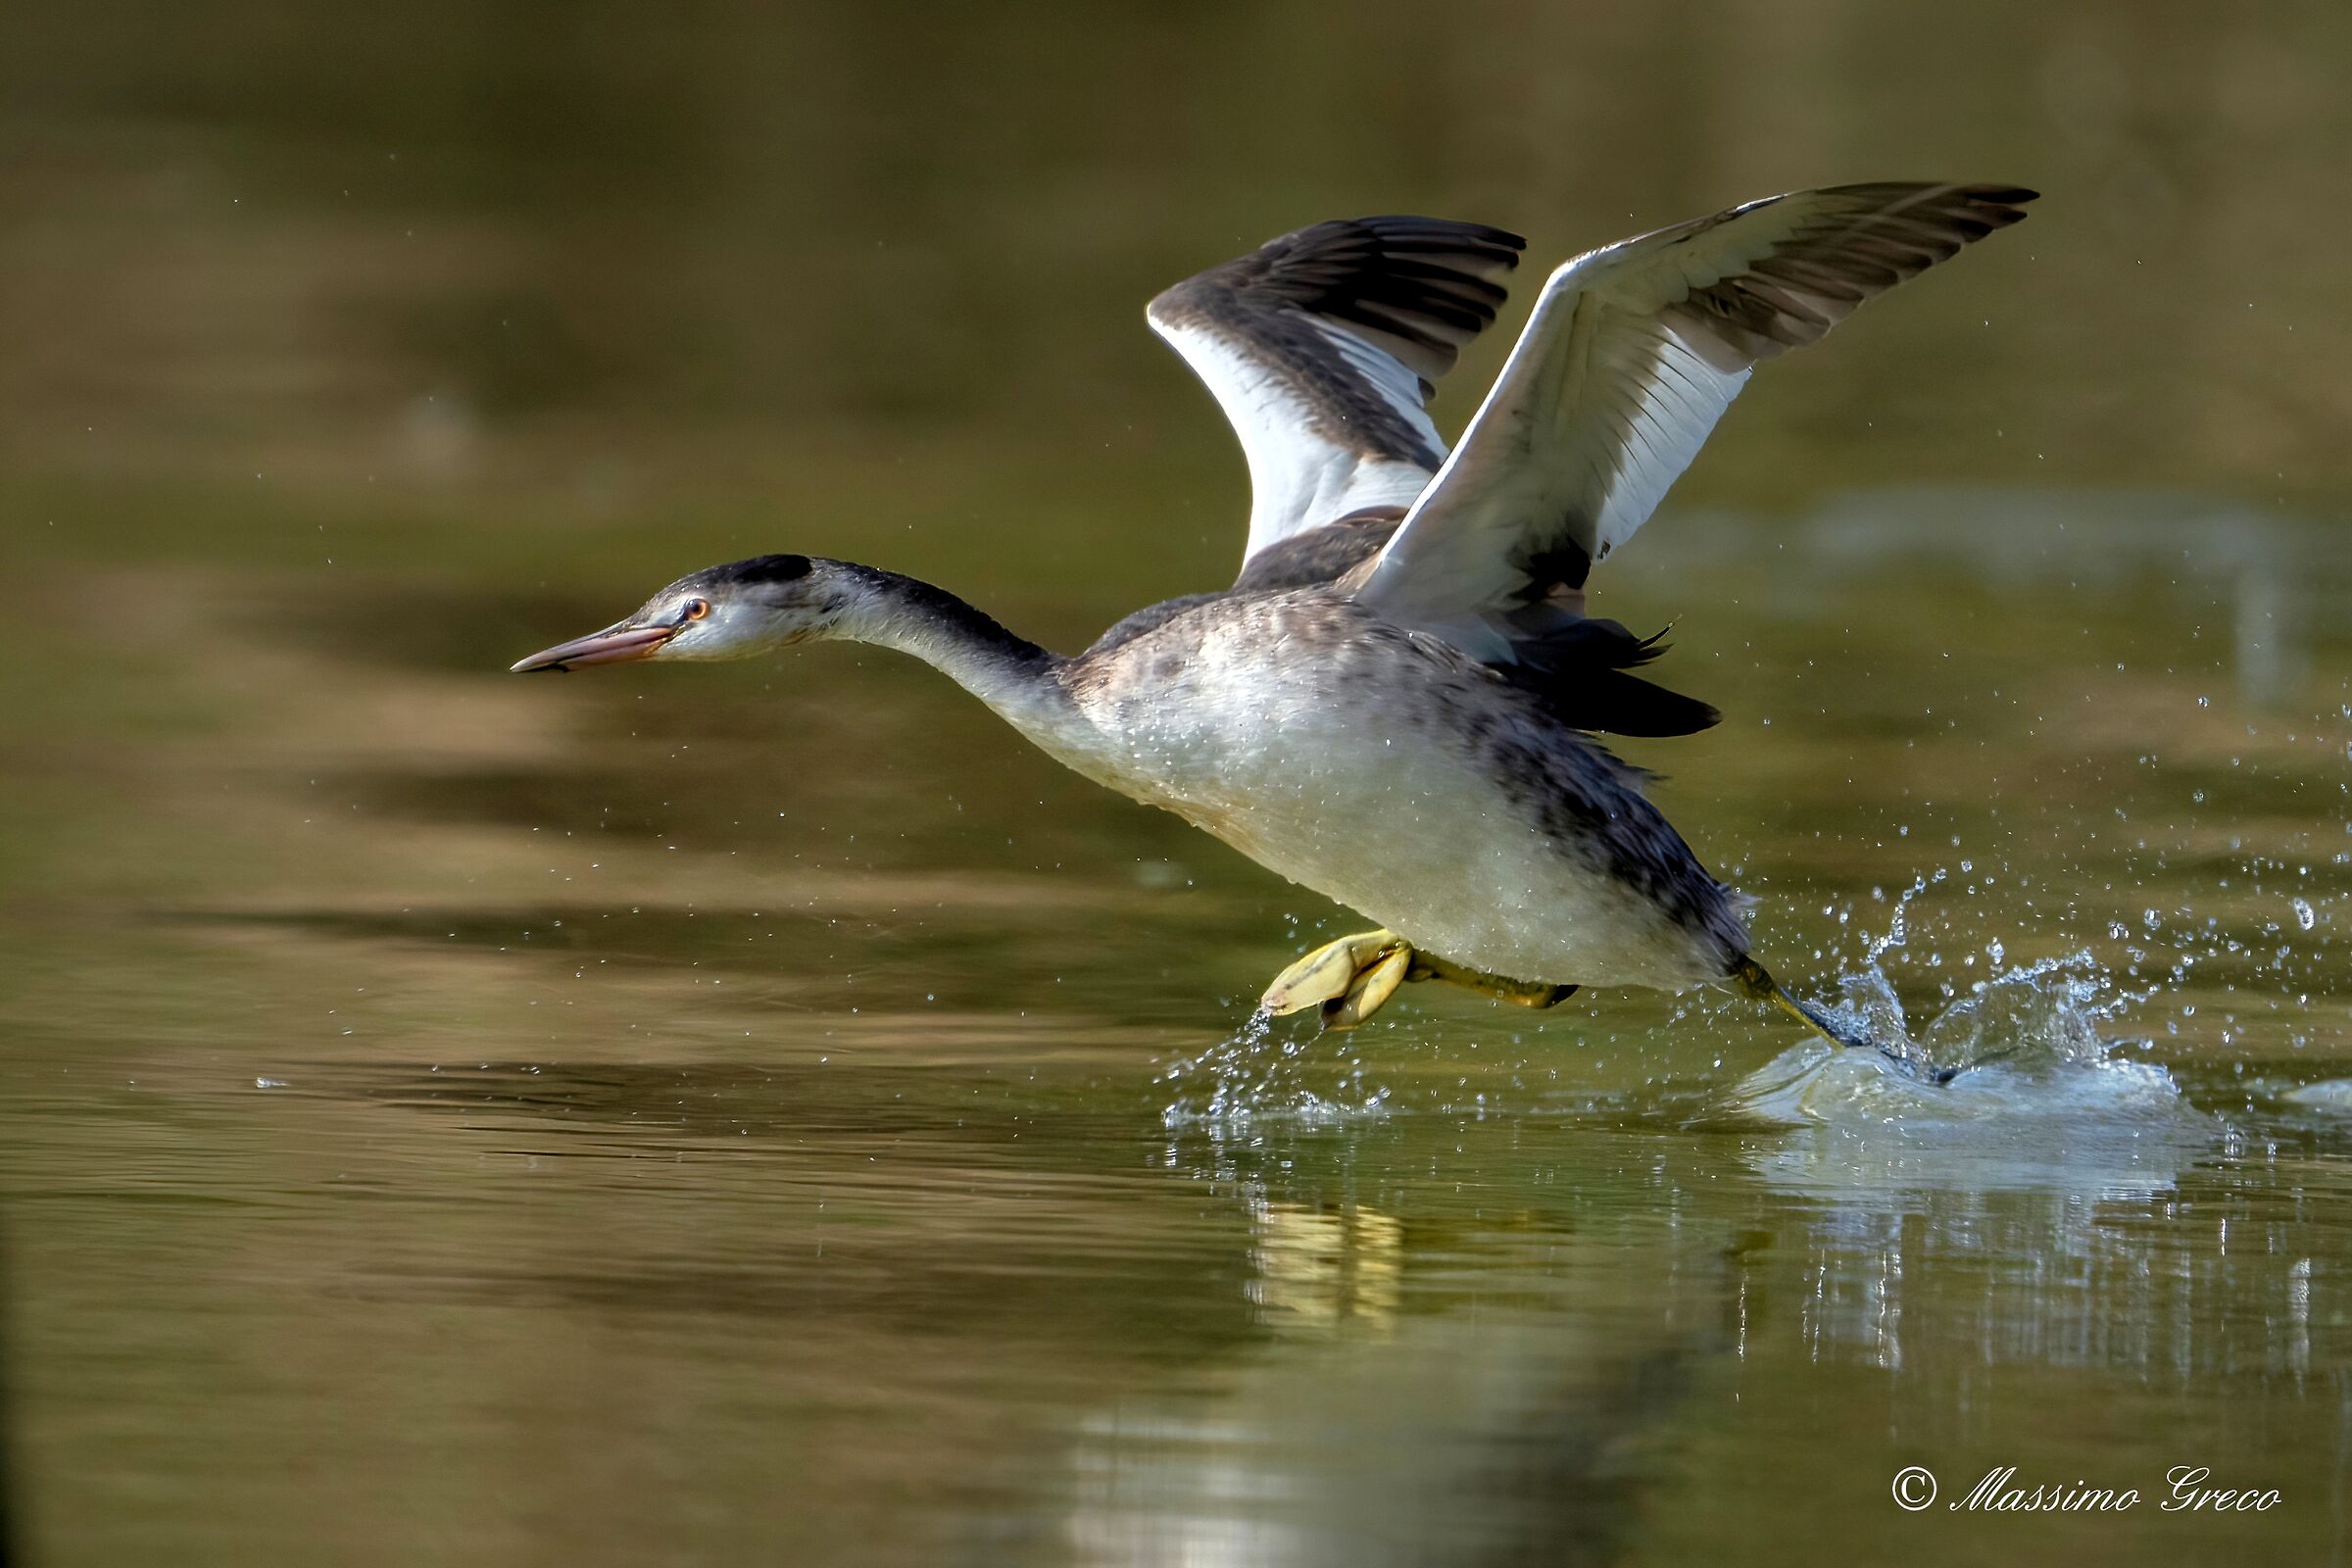 The take-off of the Great Grebe (Podiceps cristatus)...